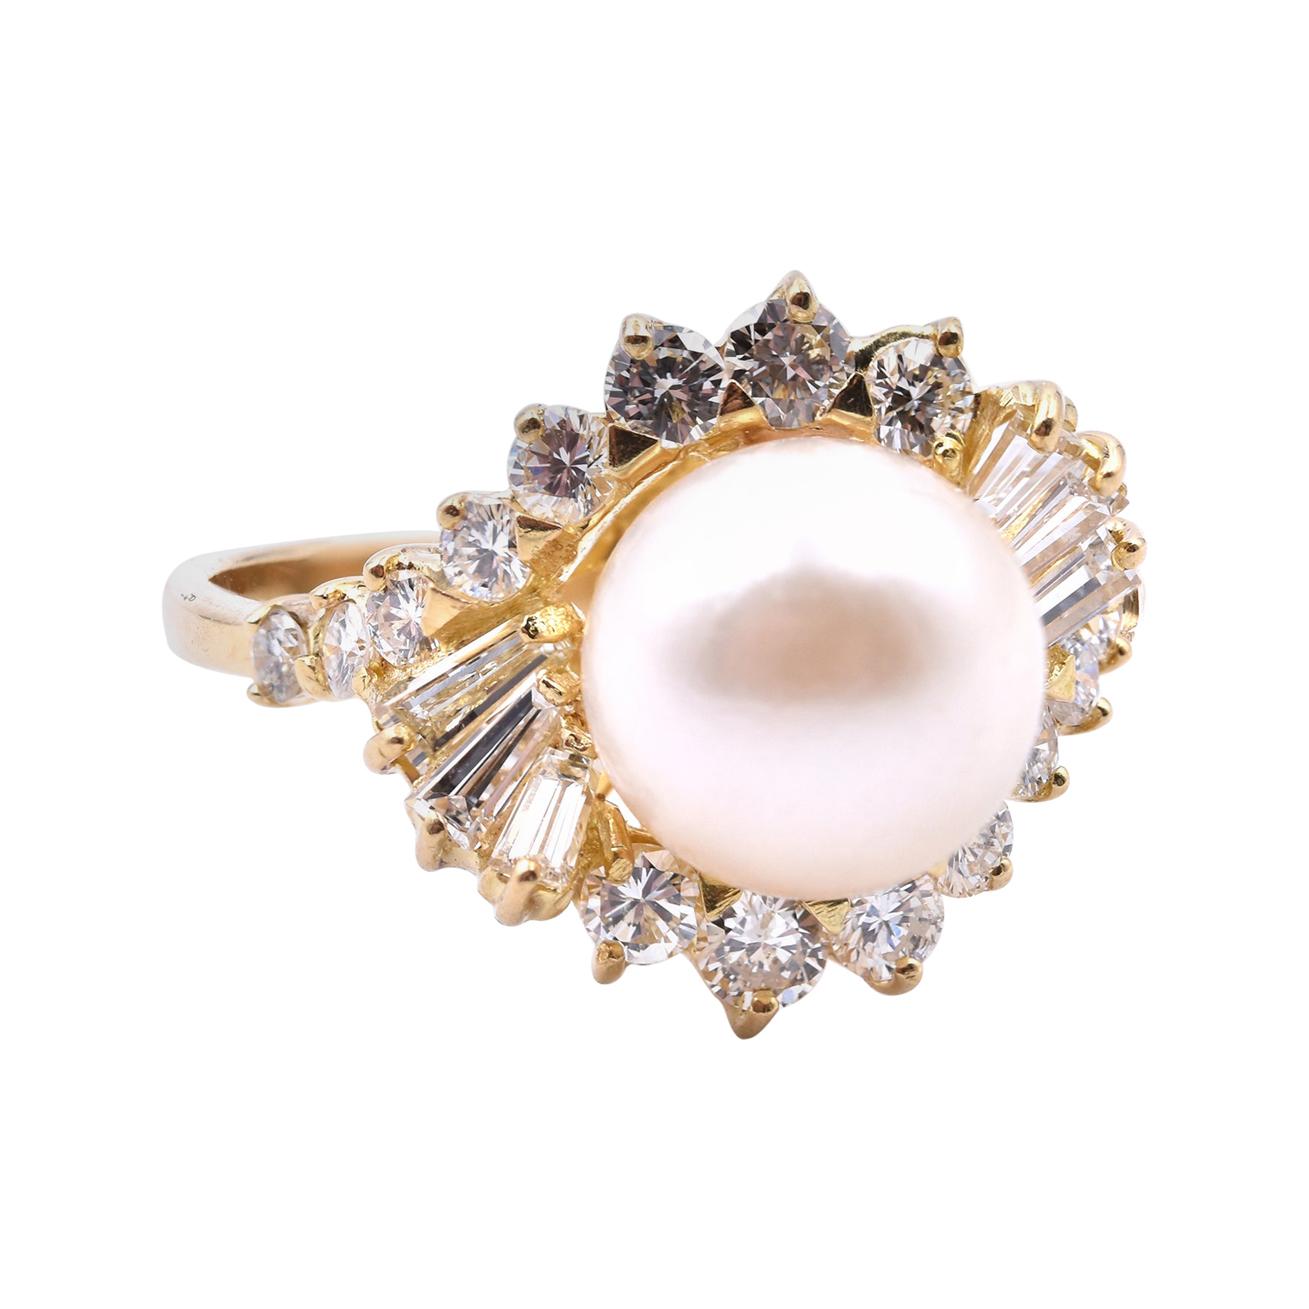 Jean Dinh Van for Pierre Cardin, 18 Karat Gold and Pearls Ring, 1966 at ...